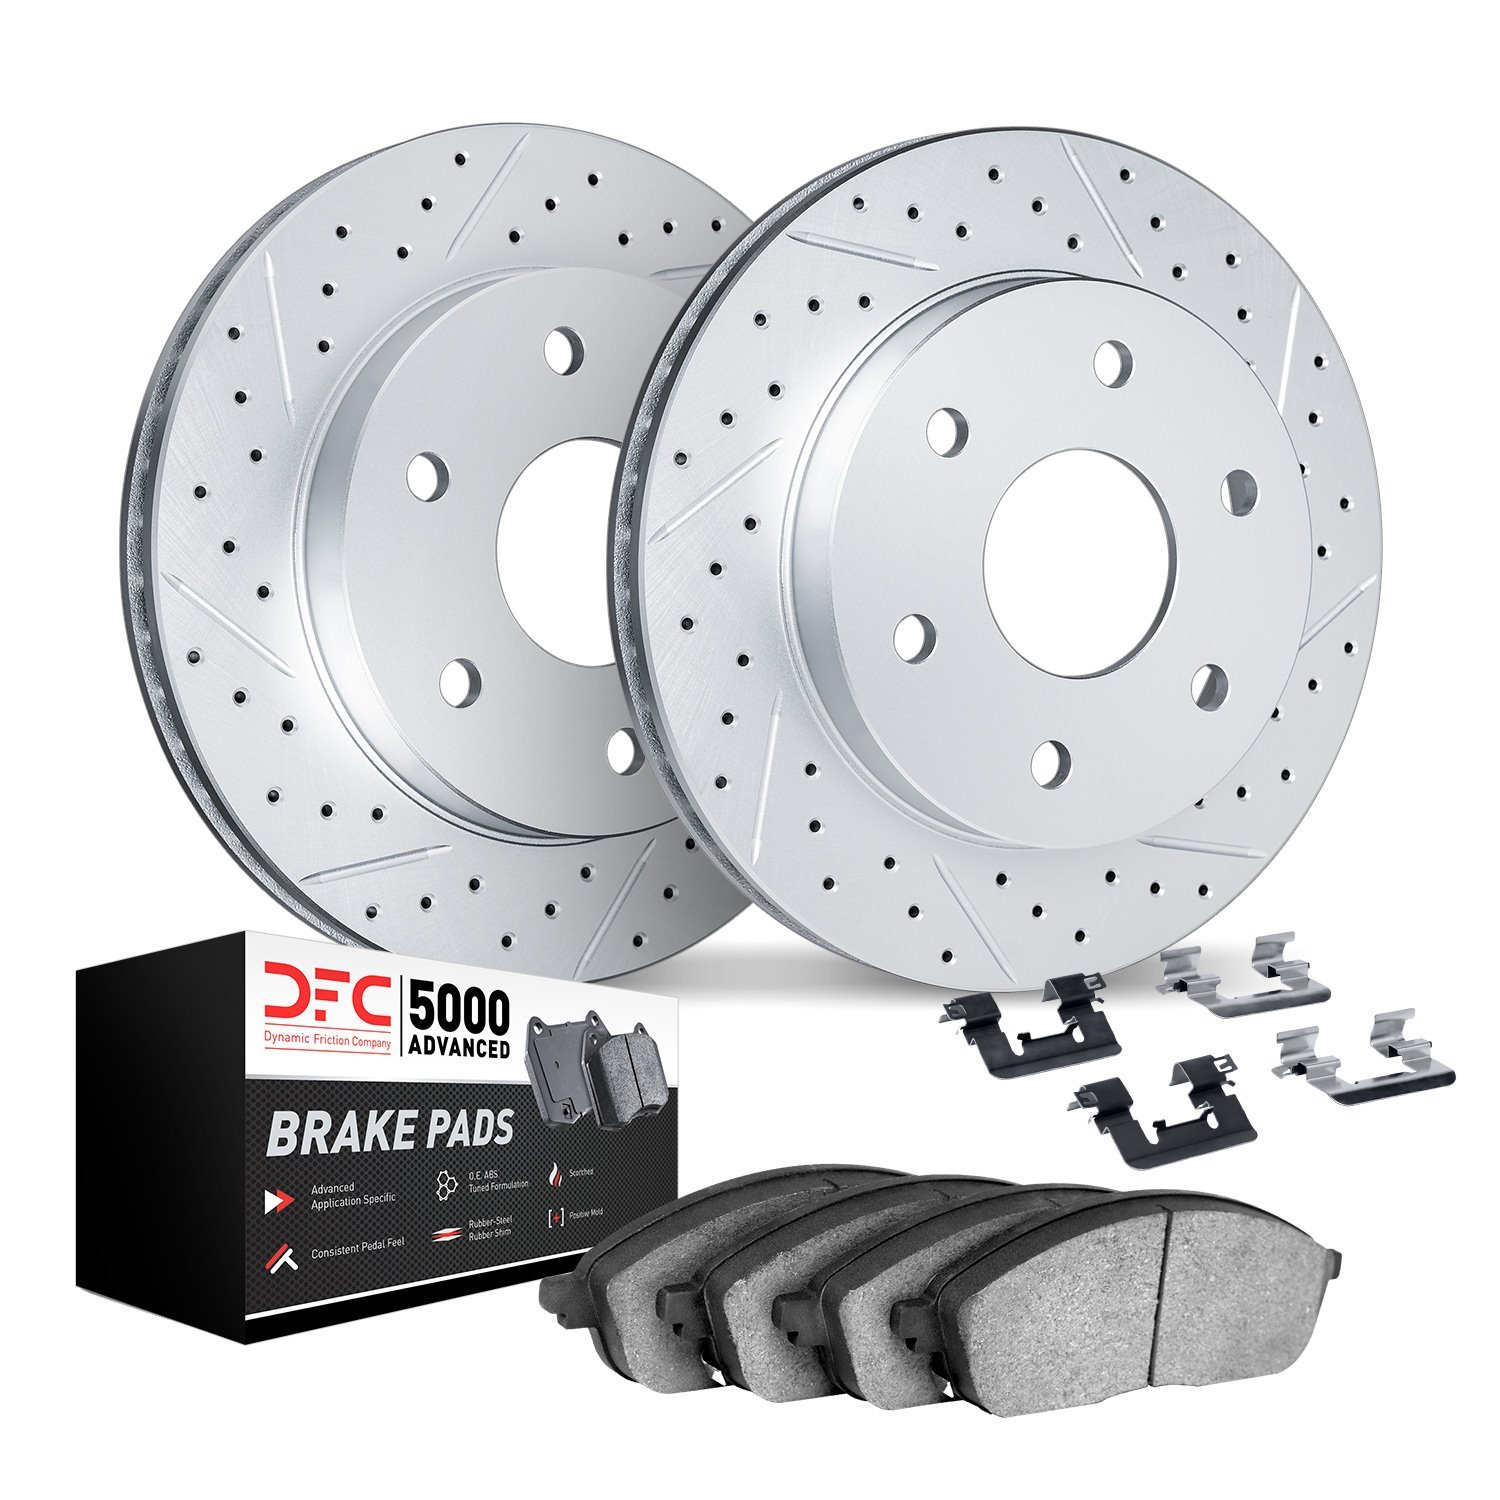 2512-54180 Geoperformance Drilled/Slotted Rotors w/5000 Advanced Brake Pads Kit & Hardware, Fits Select Ford/Lincoln/Mercury/Maz